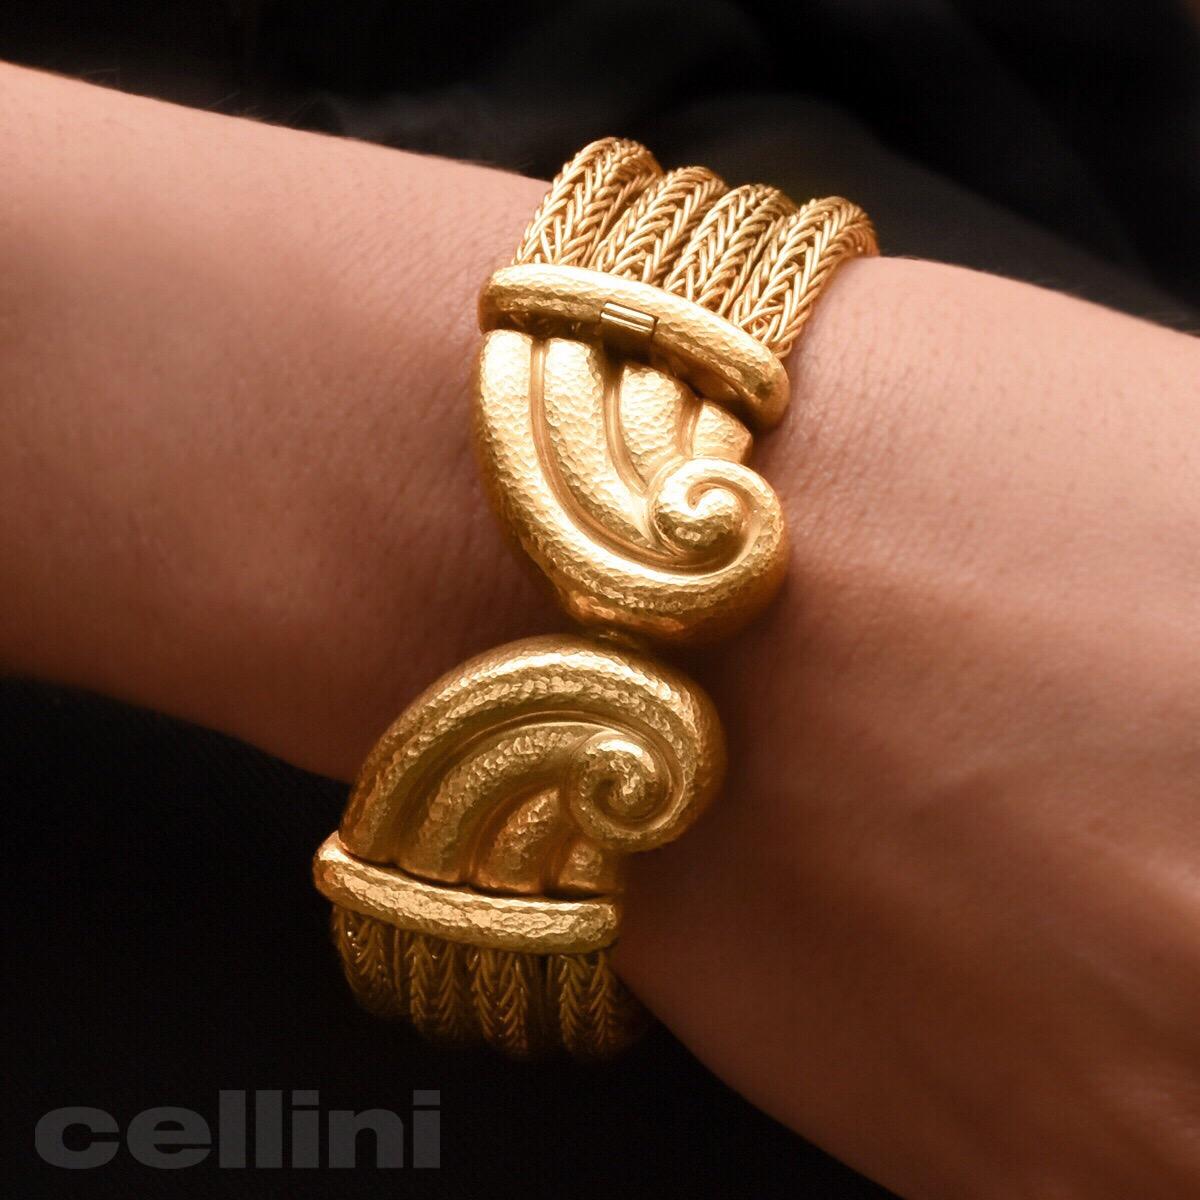 Four 18kt/ 22kt yellow gold woven ropes with a classical Greek motif center. This bracelet is designed by Zolotas of Athens , Greece. Founded in 1895 the company merges Greek heritage with modern style to create these timeless pieces. Coveted by